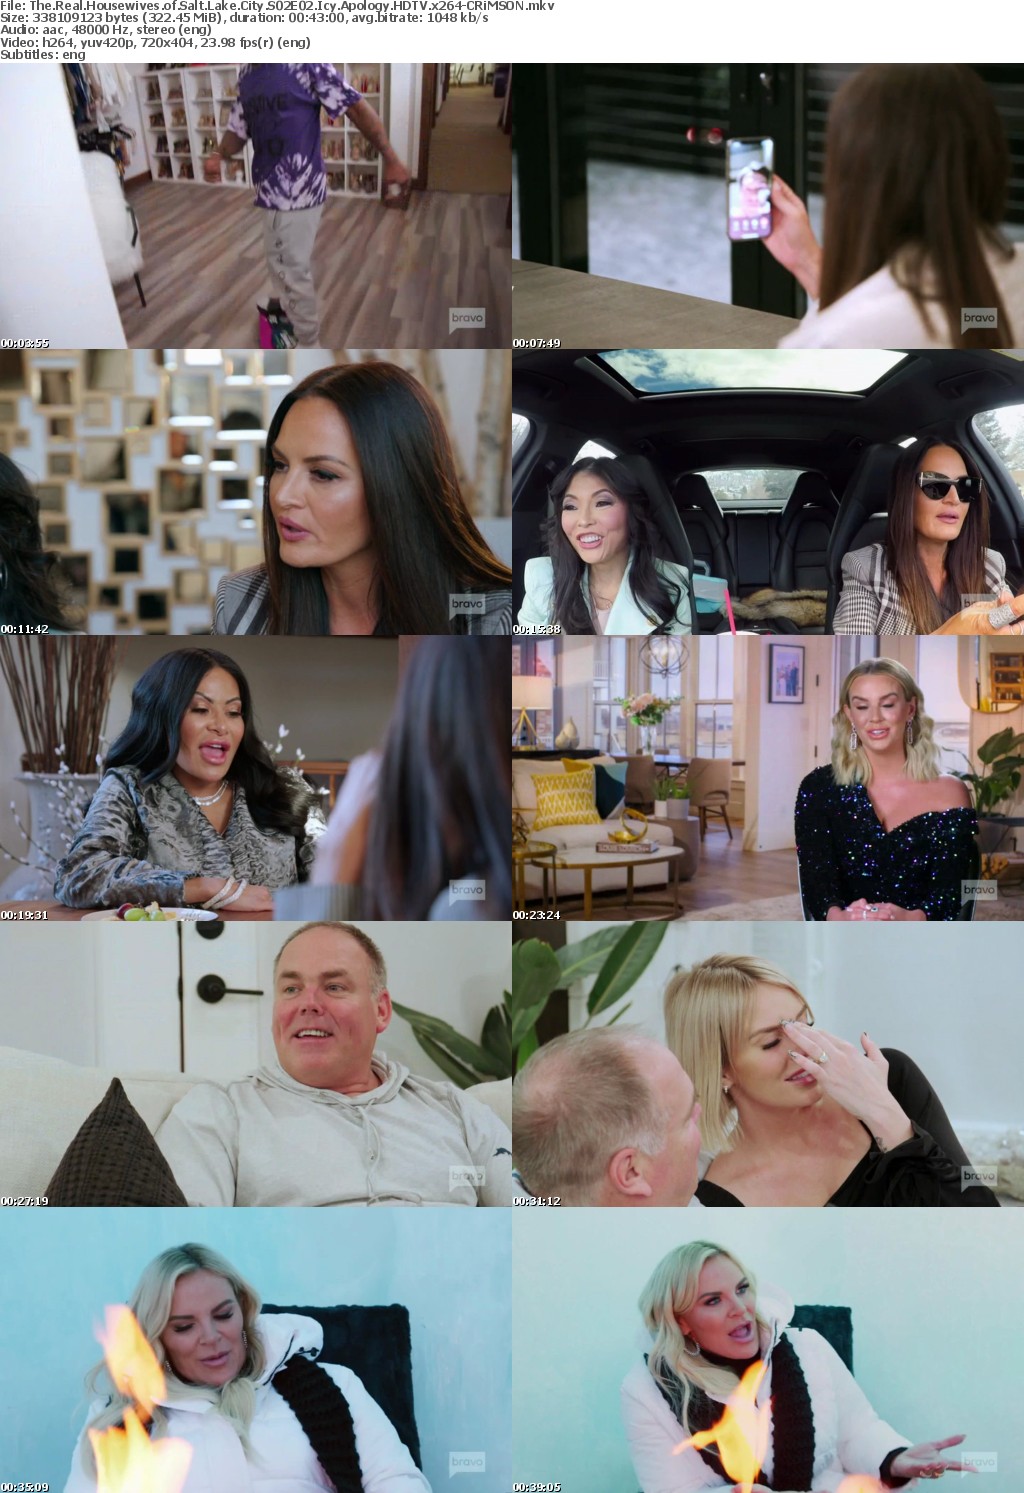 The Real Housewives of Salt Lake City S02E02 Icy Apology HDTV x264-CRiMSON